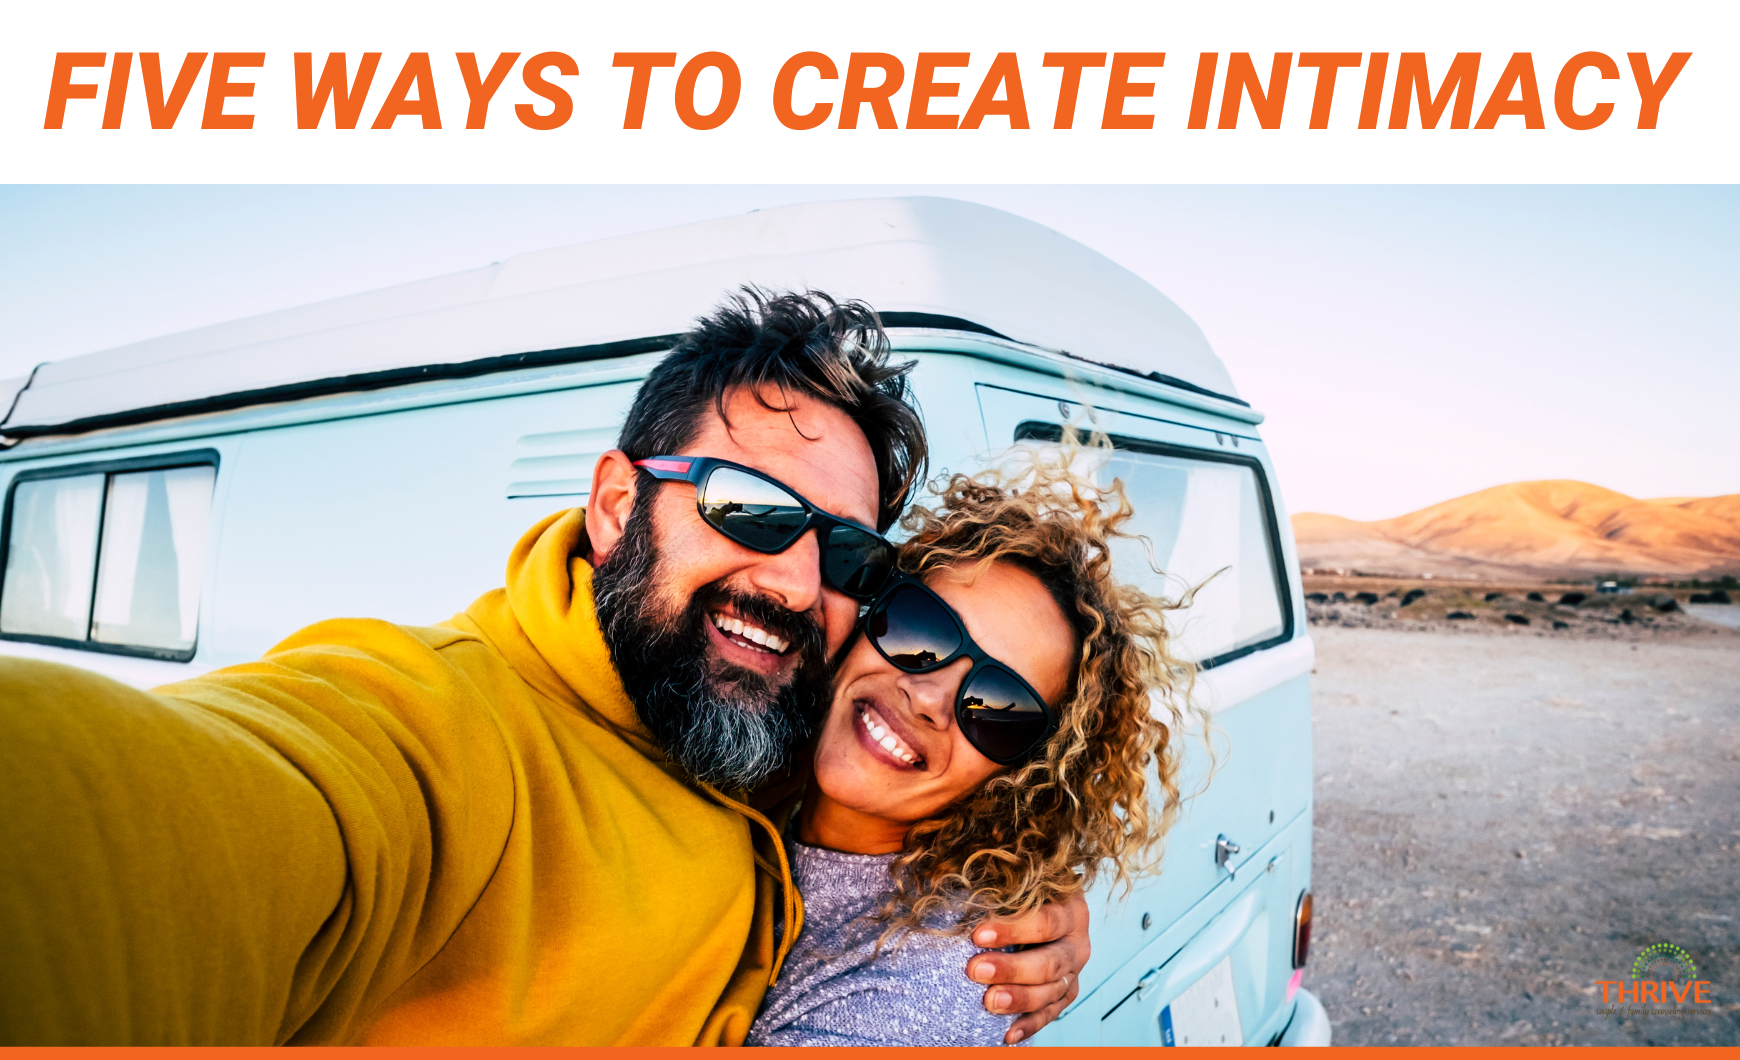 Dark orange text on a white background that reads "Five Ways to Create Intimacy" over a stock photo of a man and a woman embracing in a selfie outside a camper van with orange hills in the background. The logo for Thrive Couple & Family Counseling Services is in the bottom right corner.